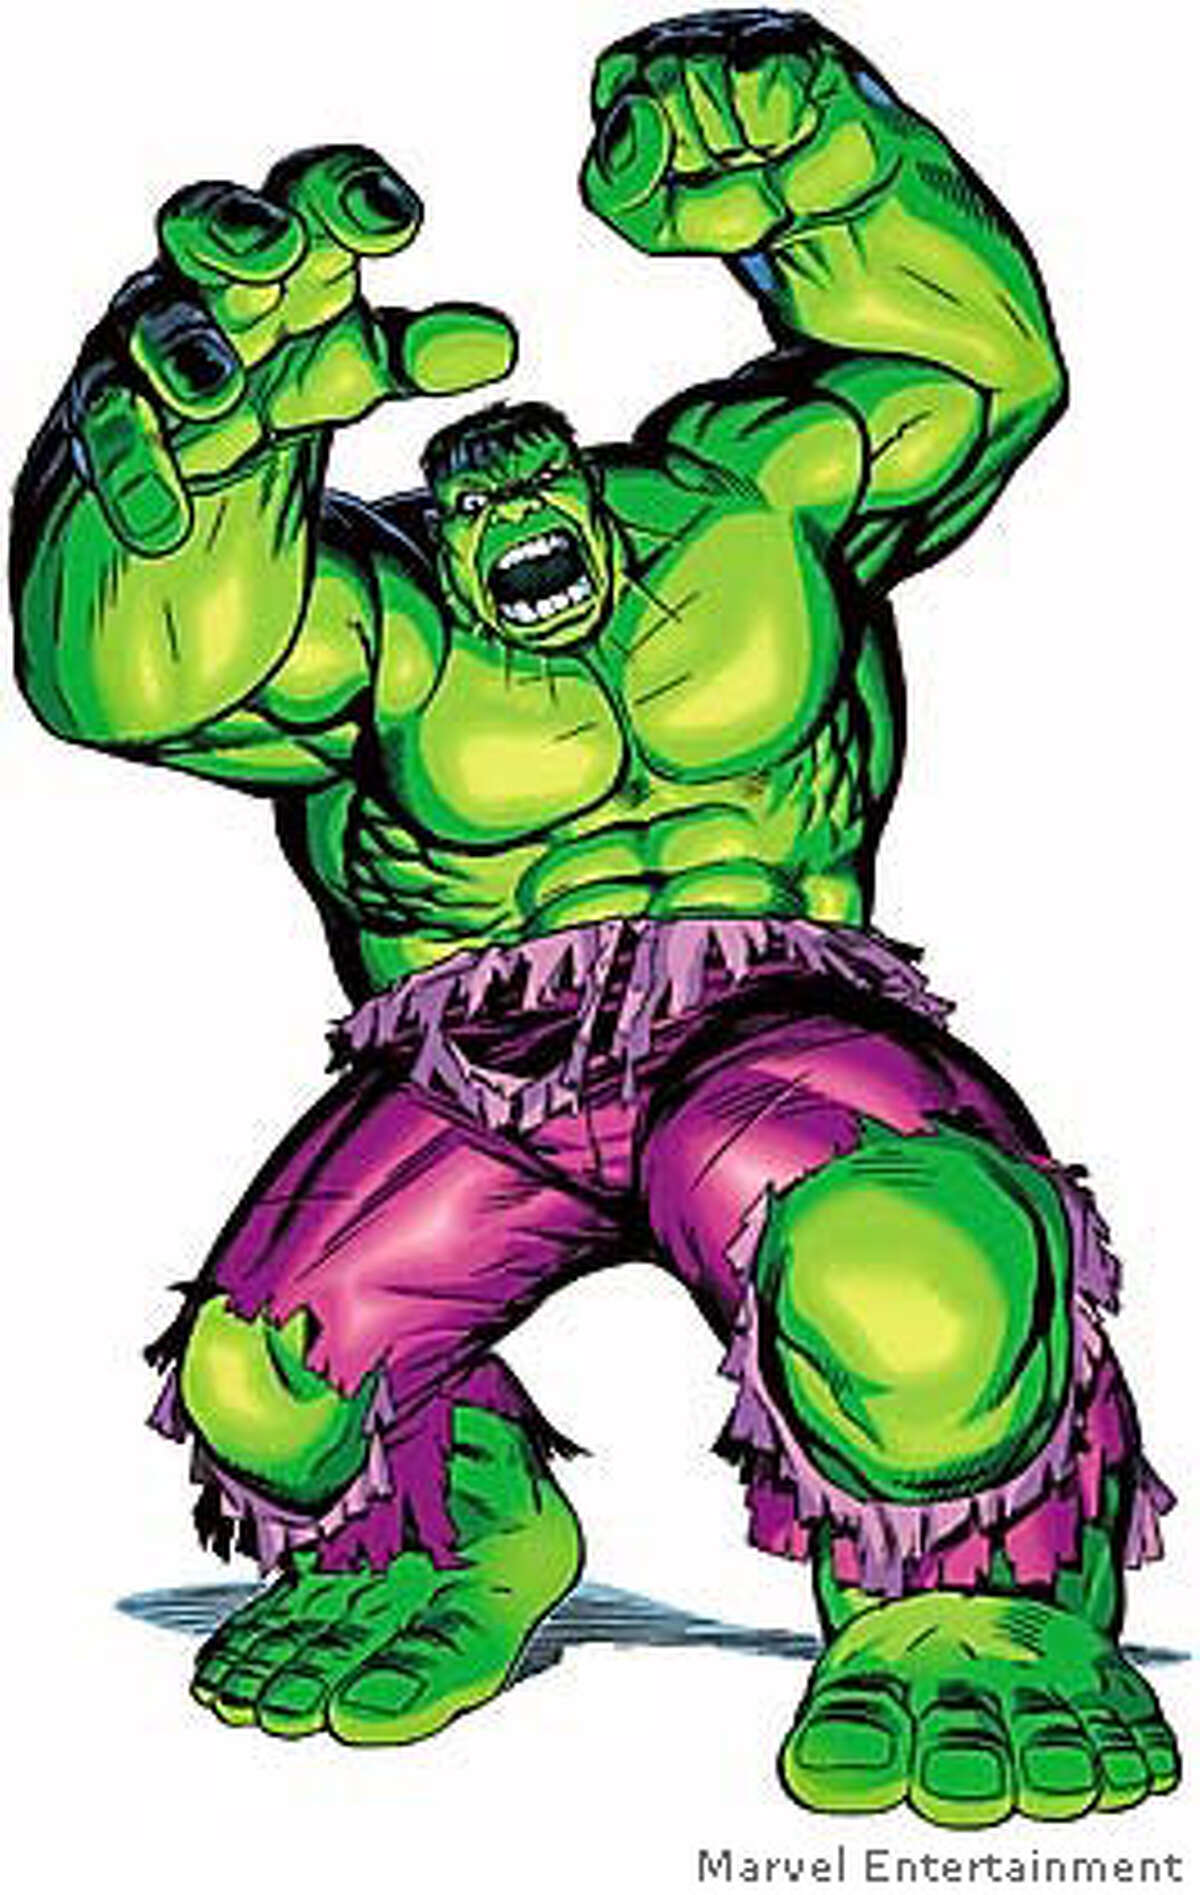 COSTUME18D-C-13FEB03-DD-HO Marvel Comics HULK STAND HANDOUT PHOTO/VERIFY RIGHTS AND USEAGE